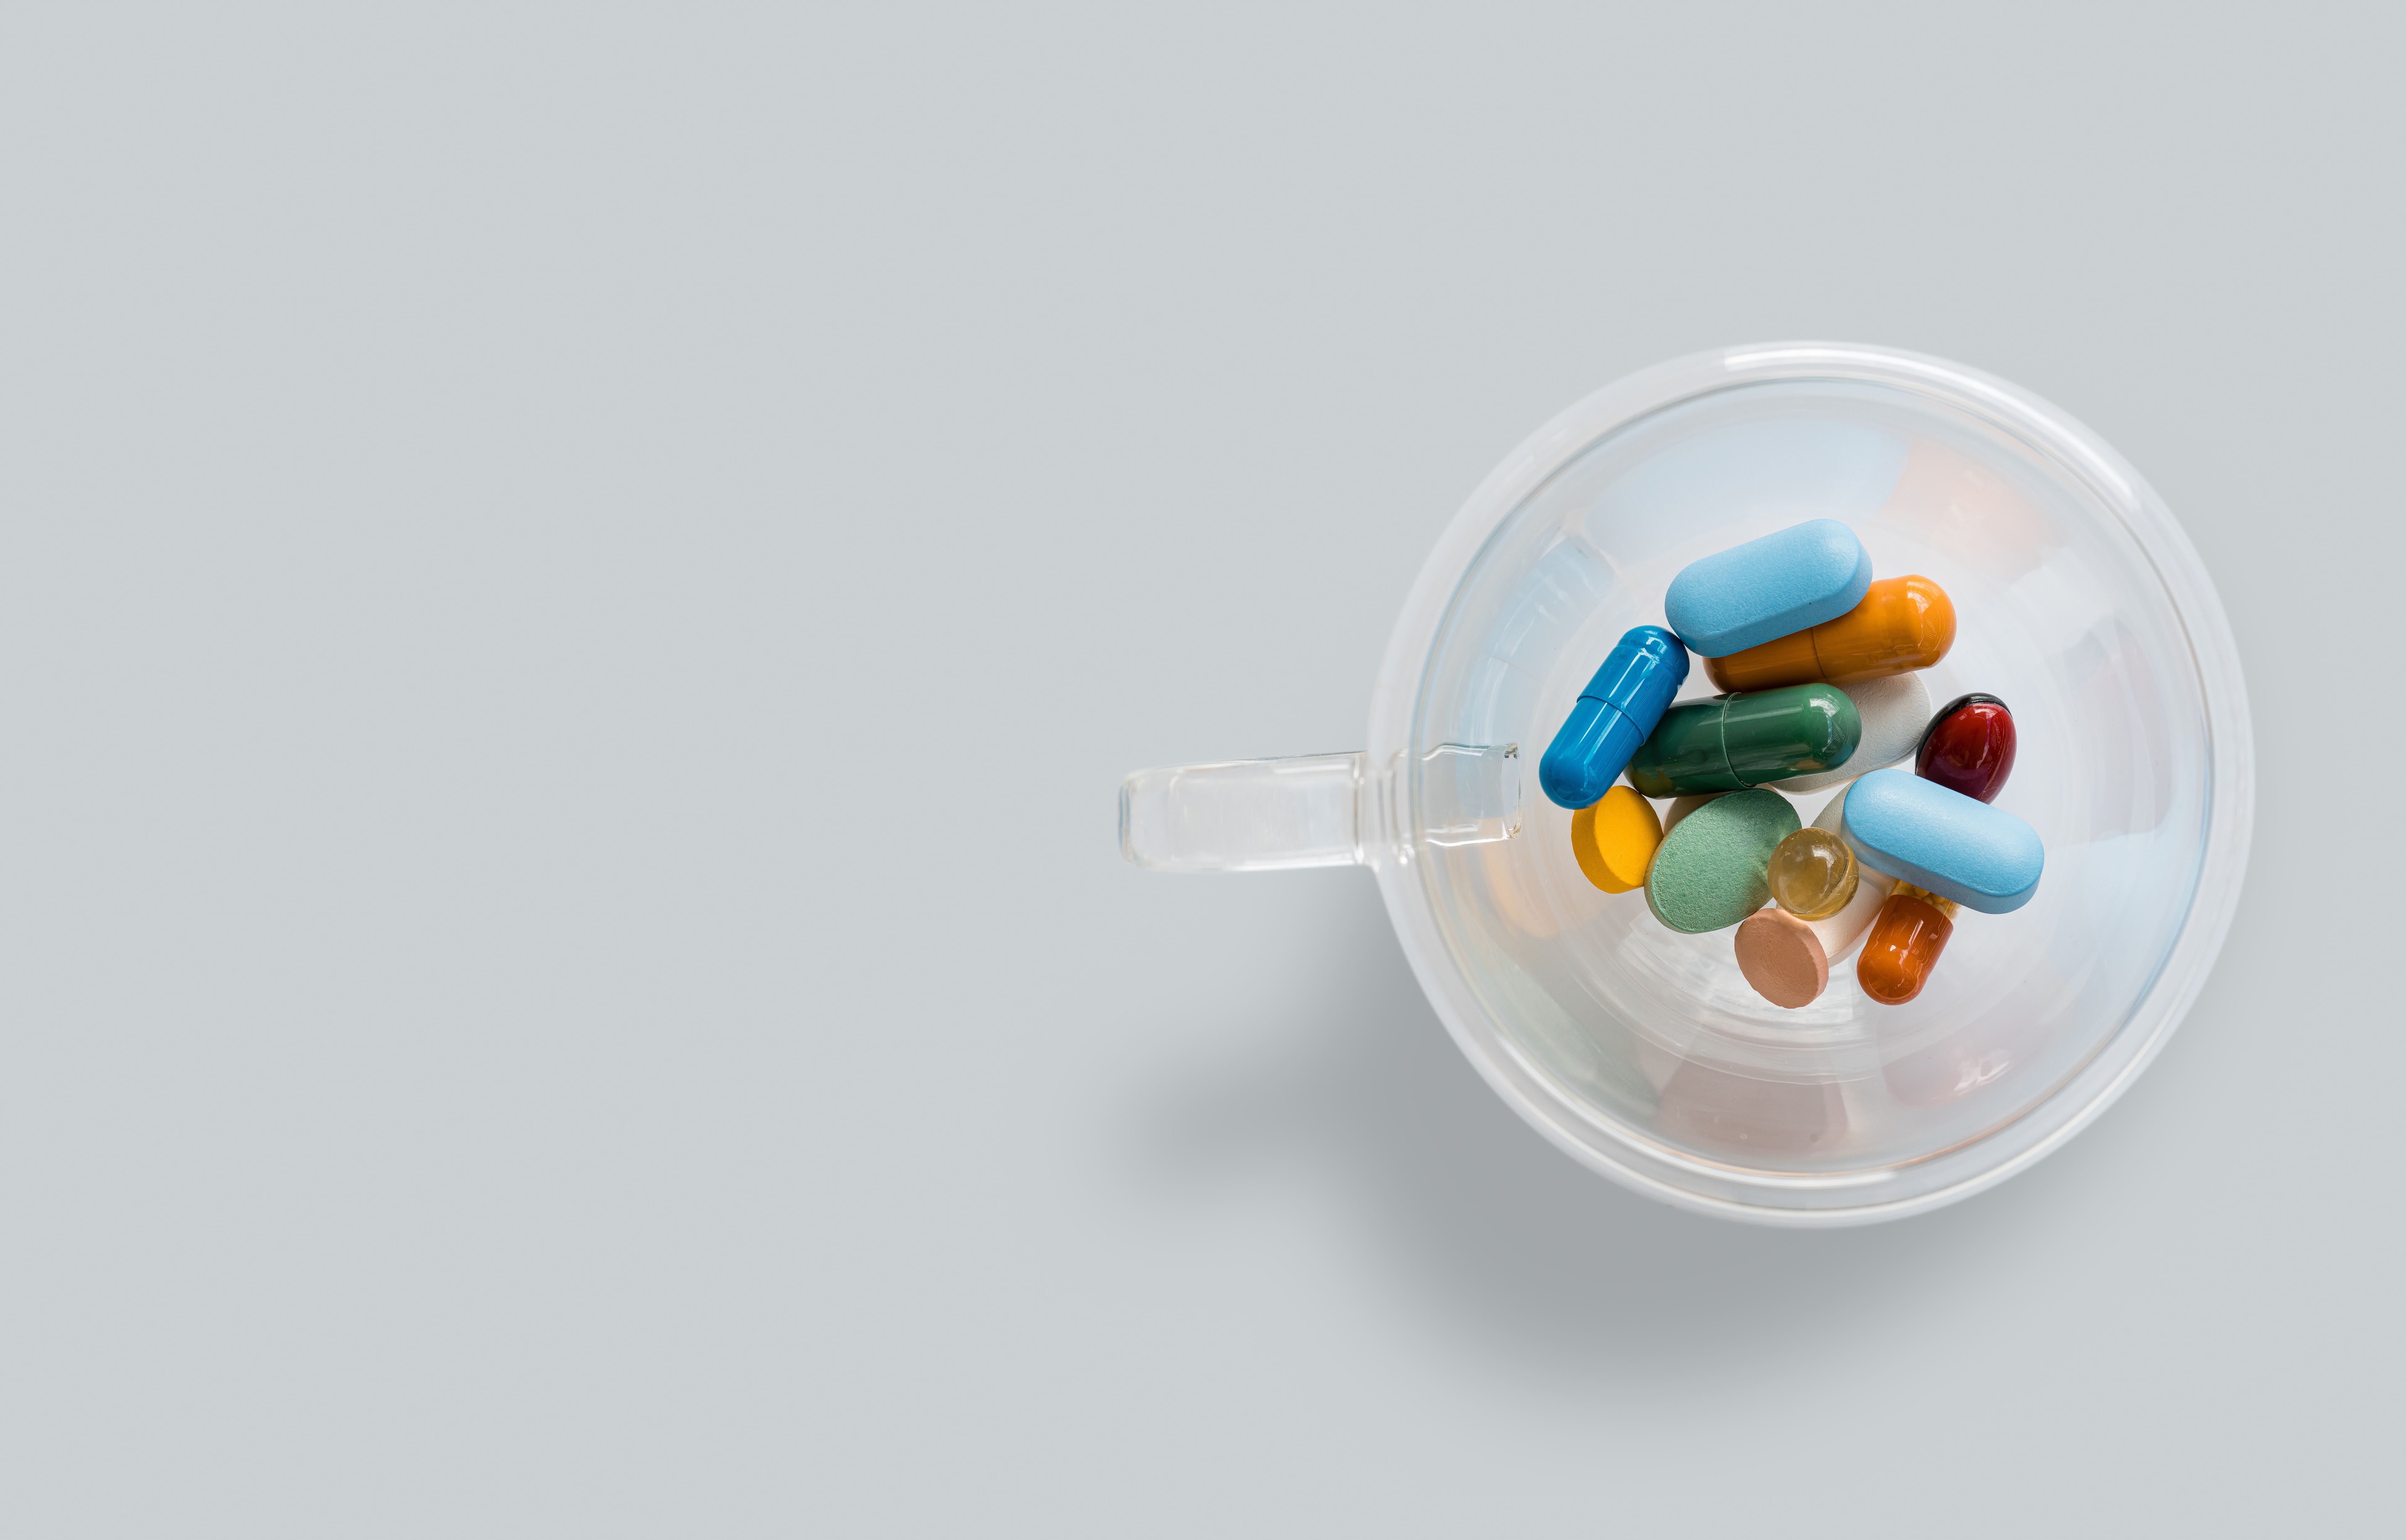 The Technology Helping Existing FDA-Approved Drugs Target More Effectively